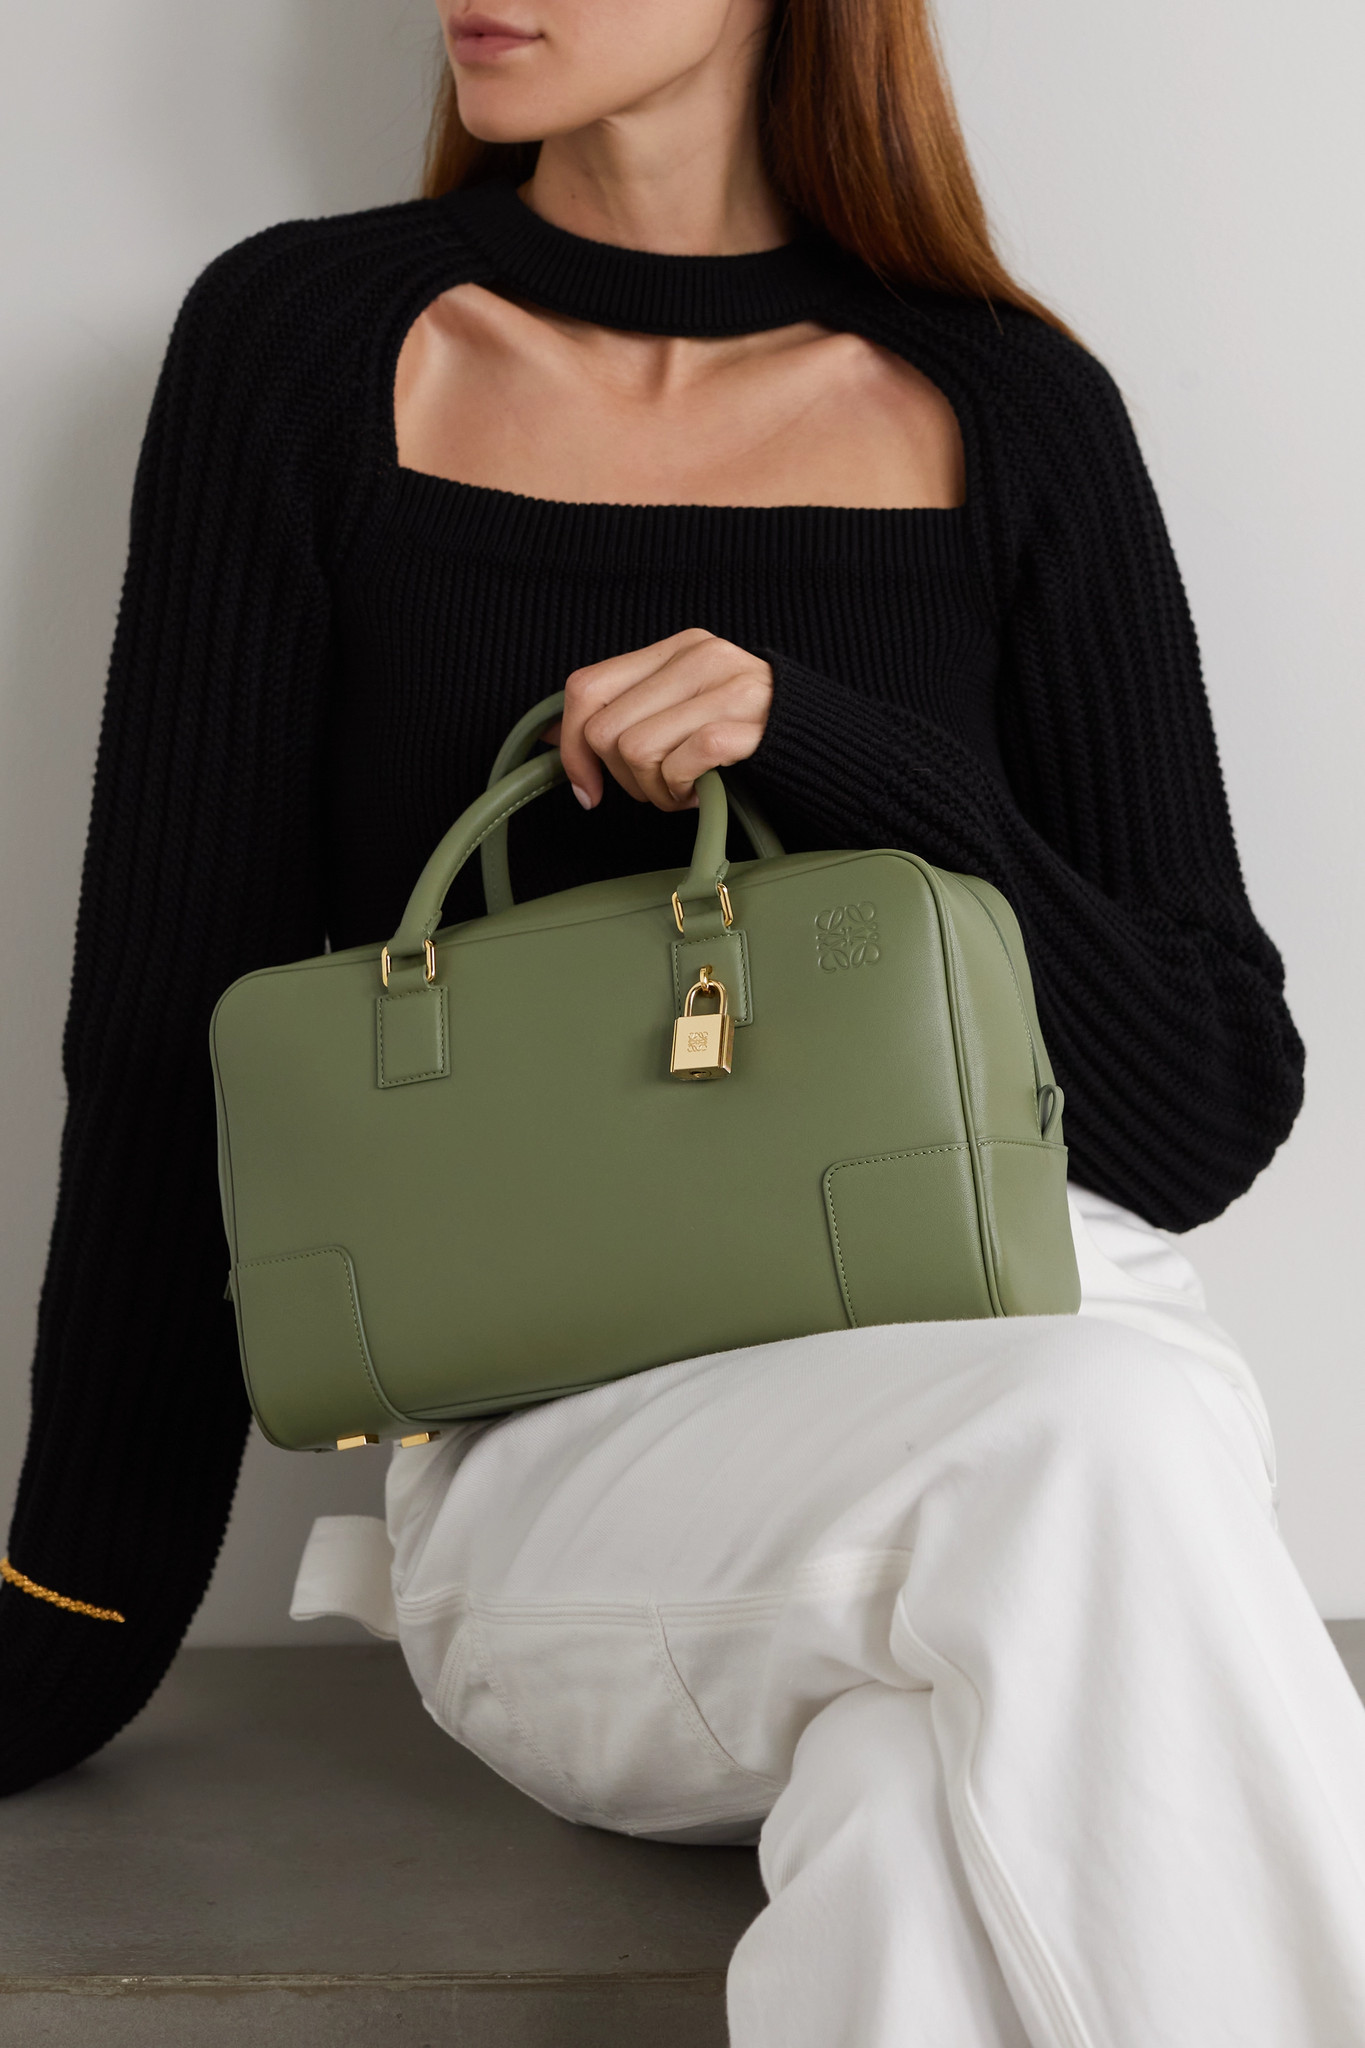 The 10 Best Designer Bags for Work That Are So Stylish